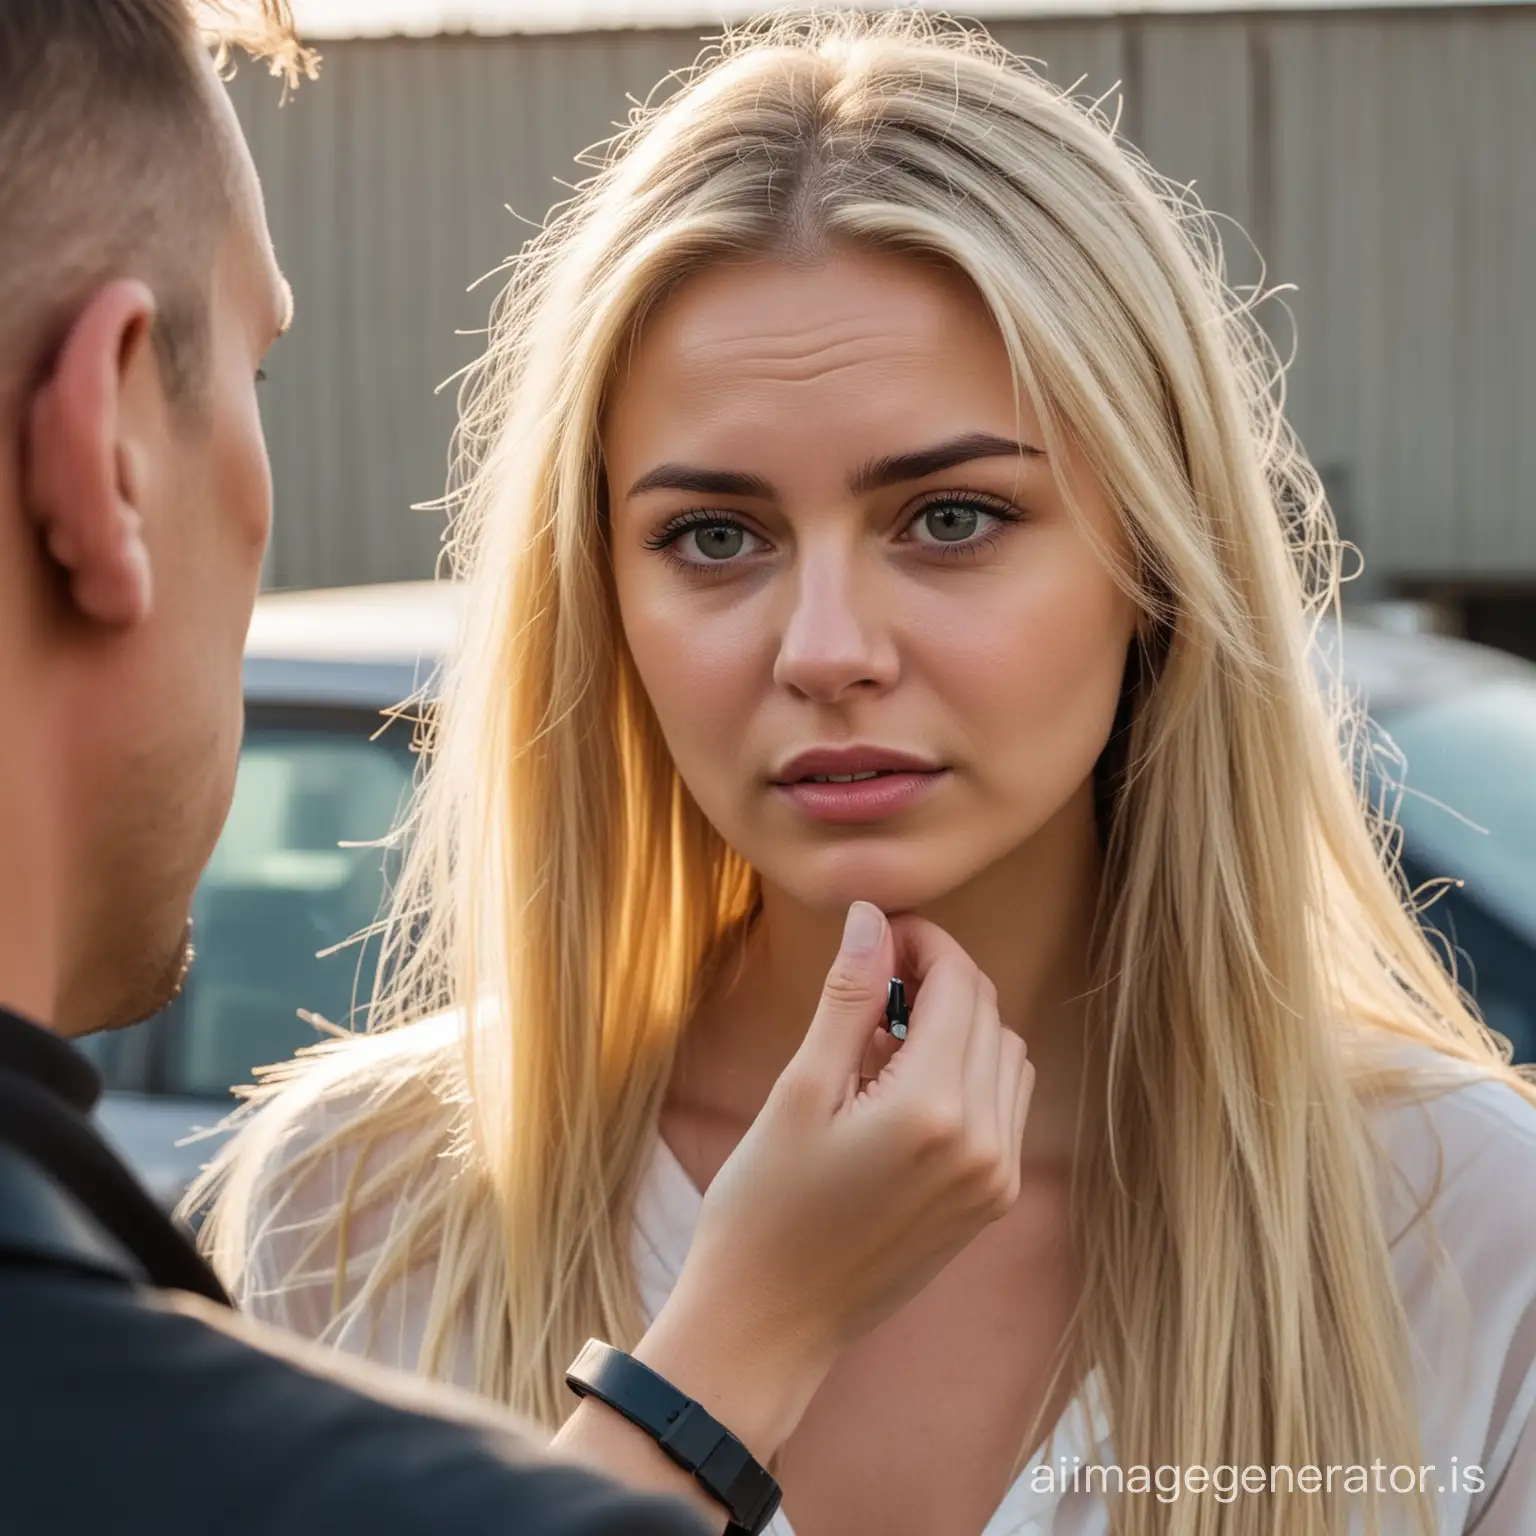 Beautiful young Polish woman with long blonde hair, talking to her handsome corrupt boss, Dan who is smuggling drugs in his imports, in a car sales yard. He has been using a microchip the size of a grain of rice on her upper arm to get her doing drug deals. She is looking distressed, as she knows what he has been doing.